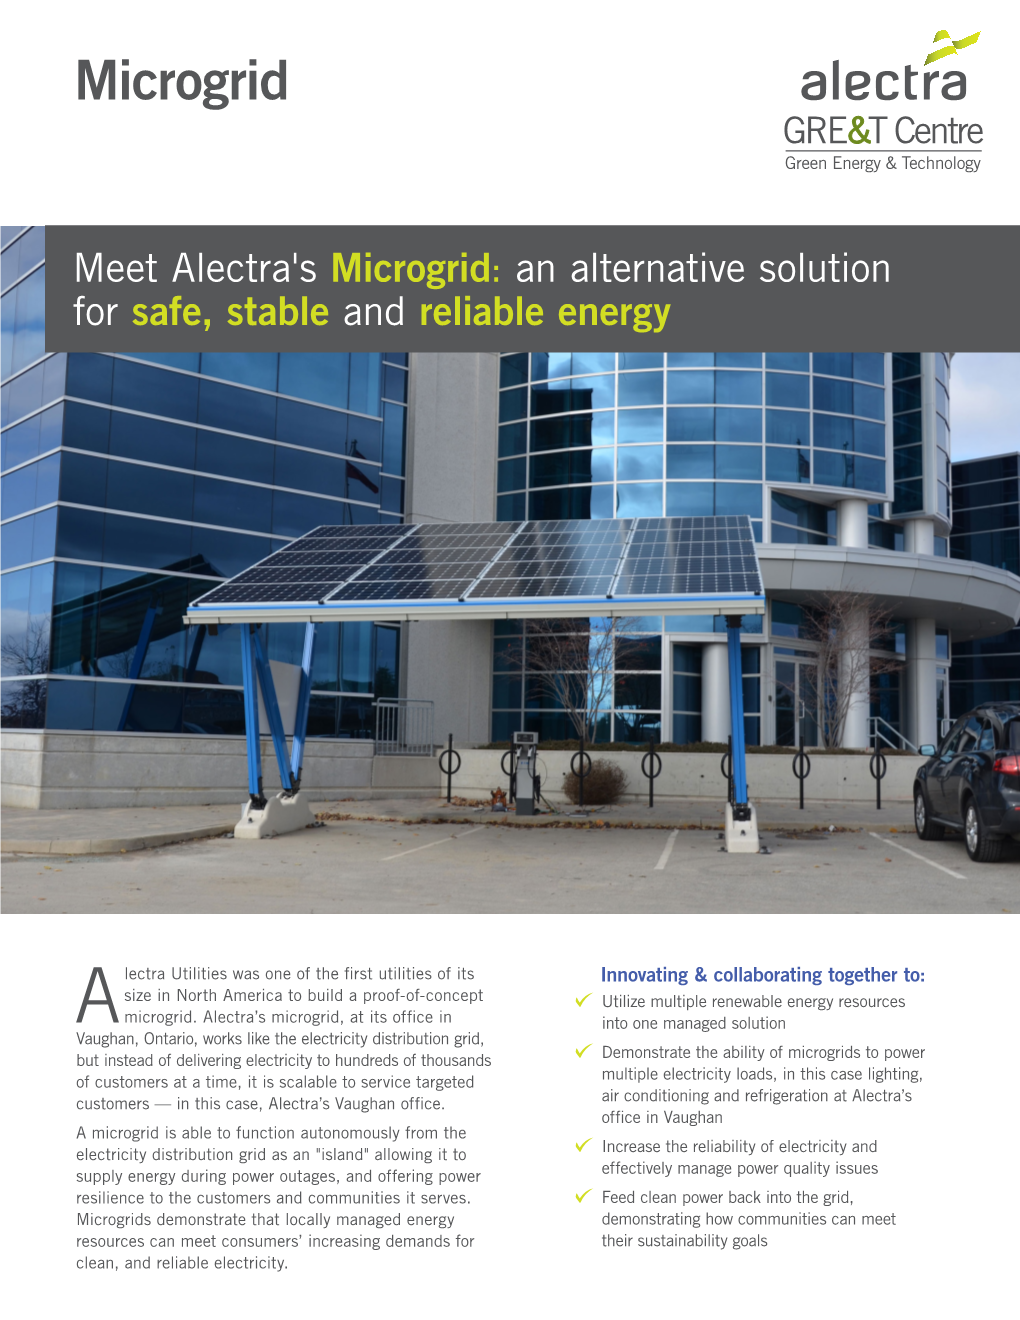 Meet Alectra's Microgrid: an Alternative Solution for Safe, Stable and Reliable Energy